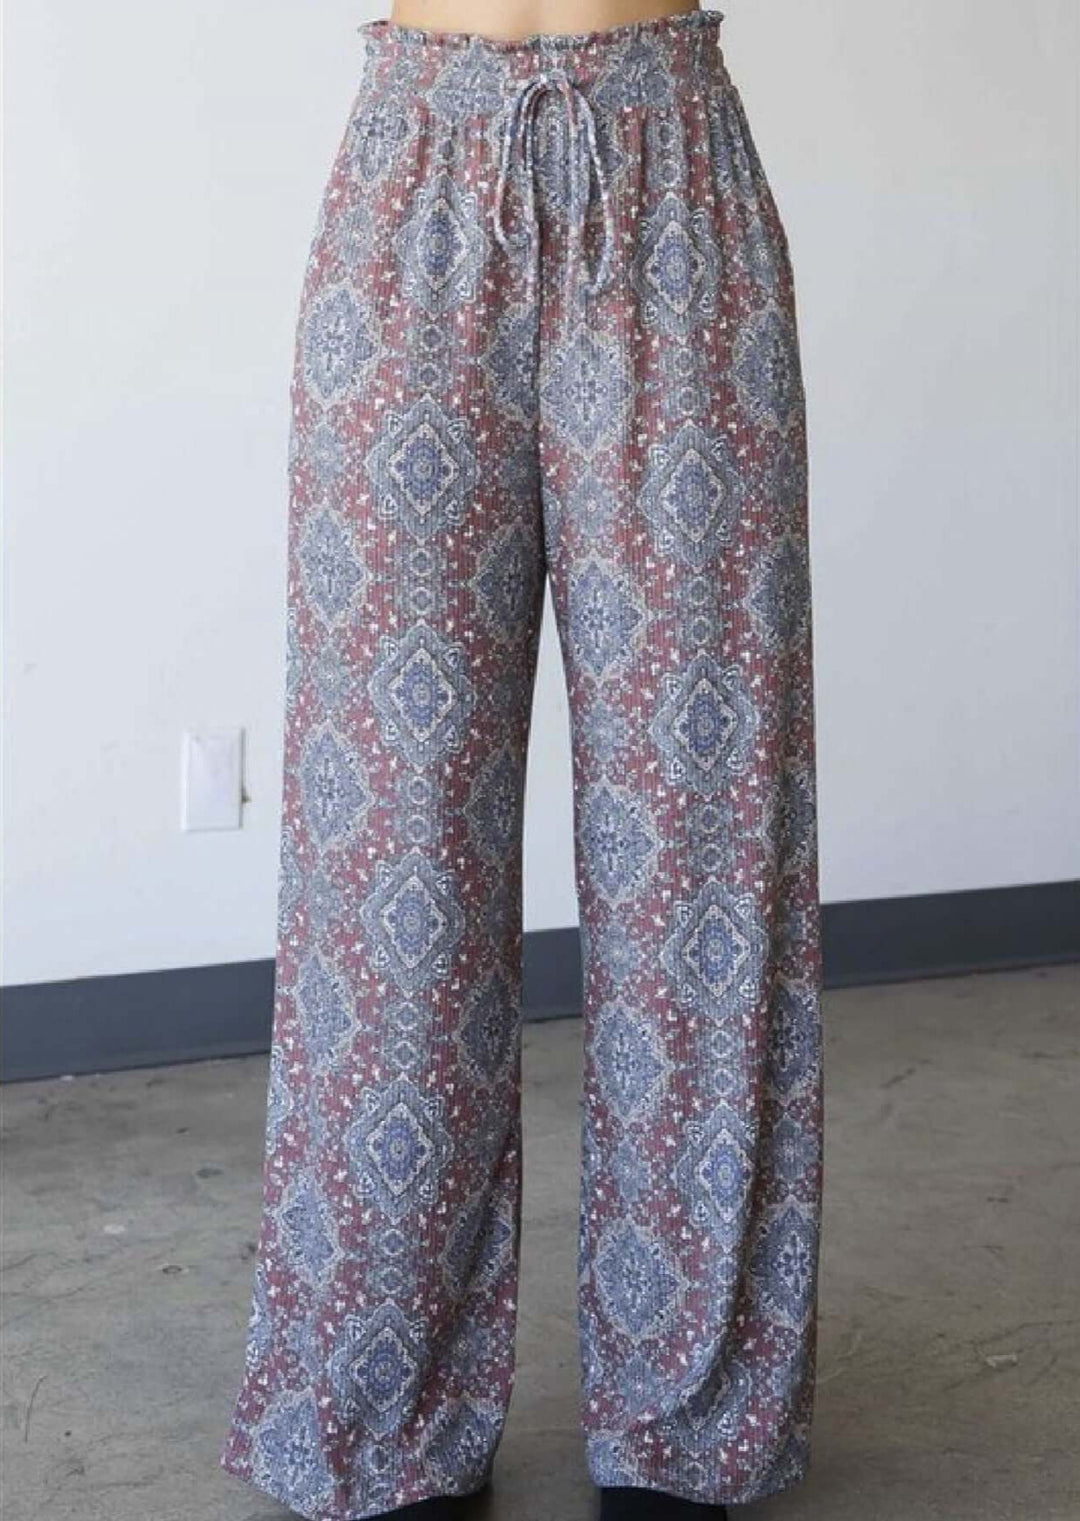 USA Made Ladies Soft & Lightweight Relaxed Fit Ribbed Aztec Pattern Wide Leg Pants in Blue, Off White and Burgundy | Classy Cozy Cool Women's Made in America Clothing Boutique